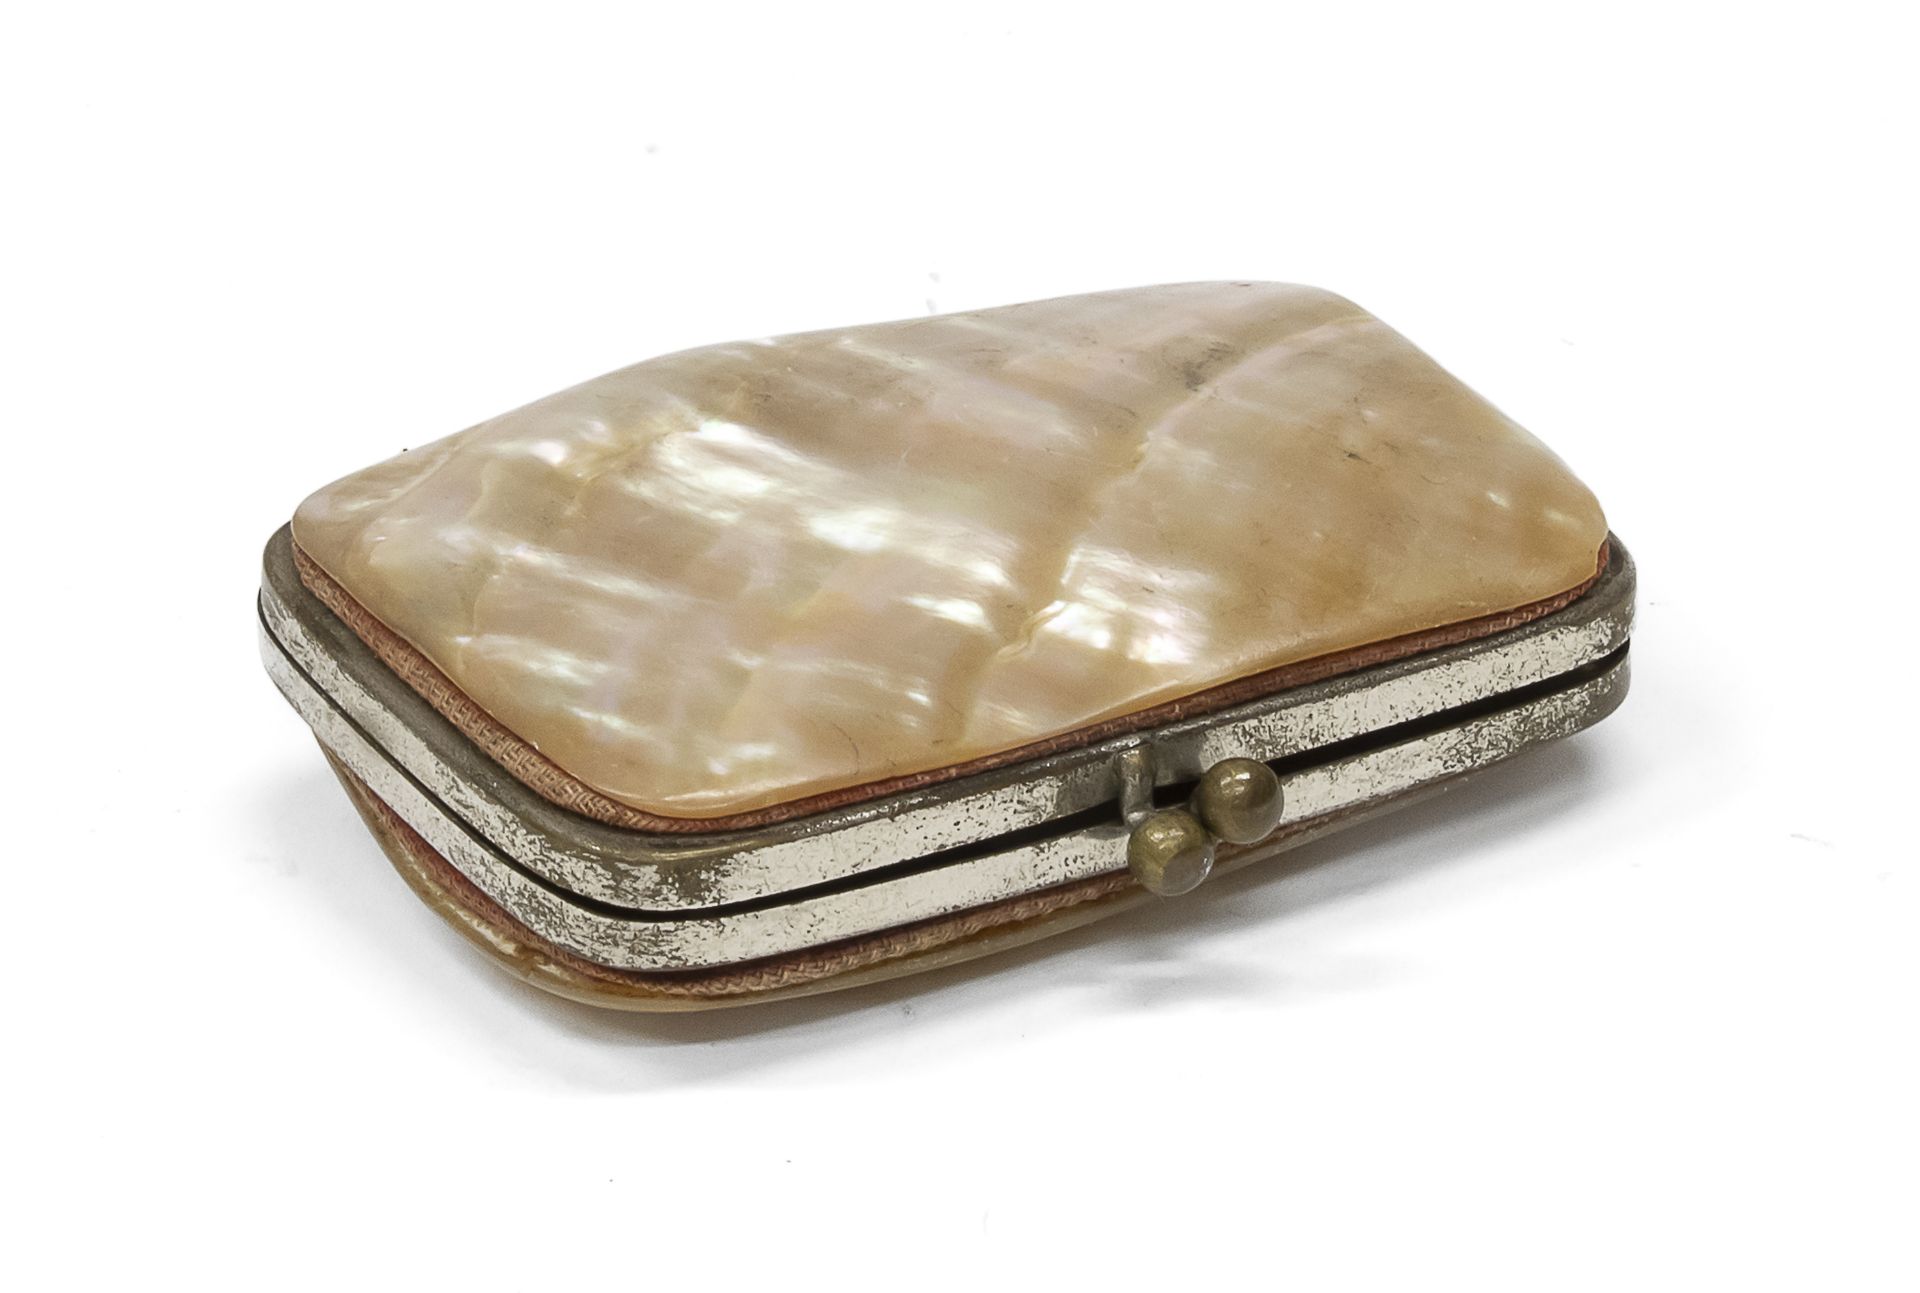 MOTHER OF PEARL PURSE EARLY 20TH CENTURY